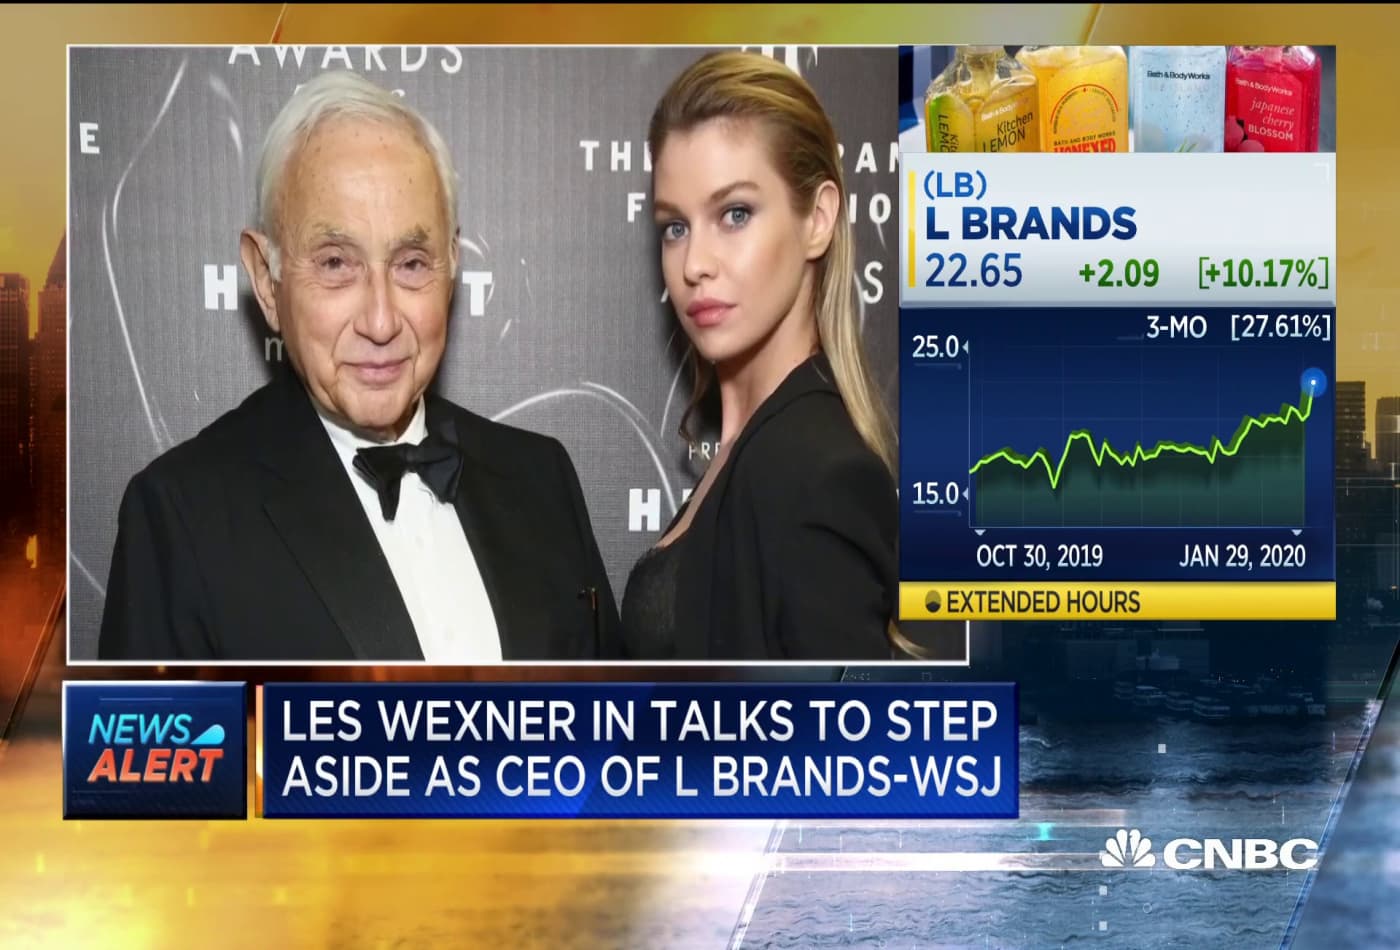 Les Wexner News, Articles, Stories & Trends for Today1400 x 950